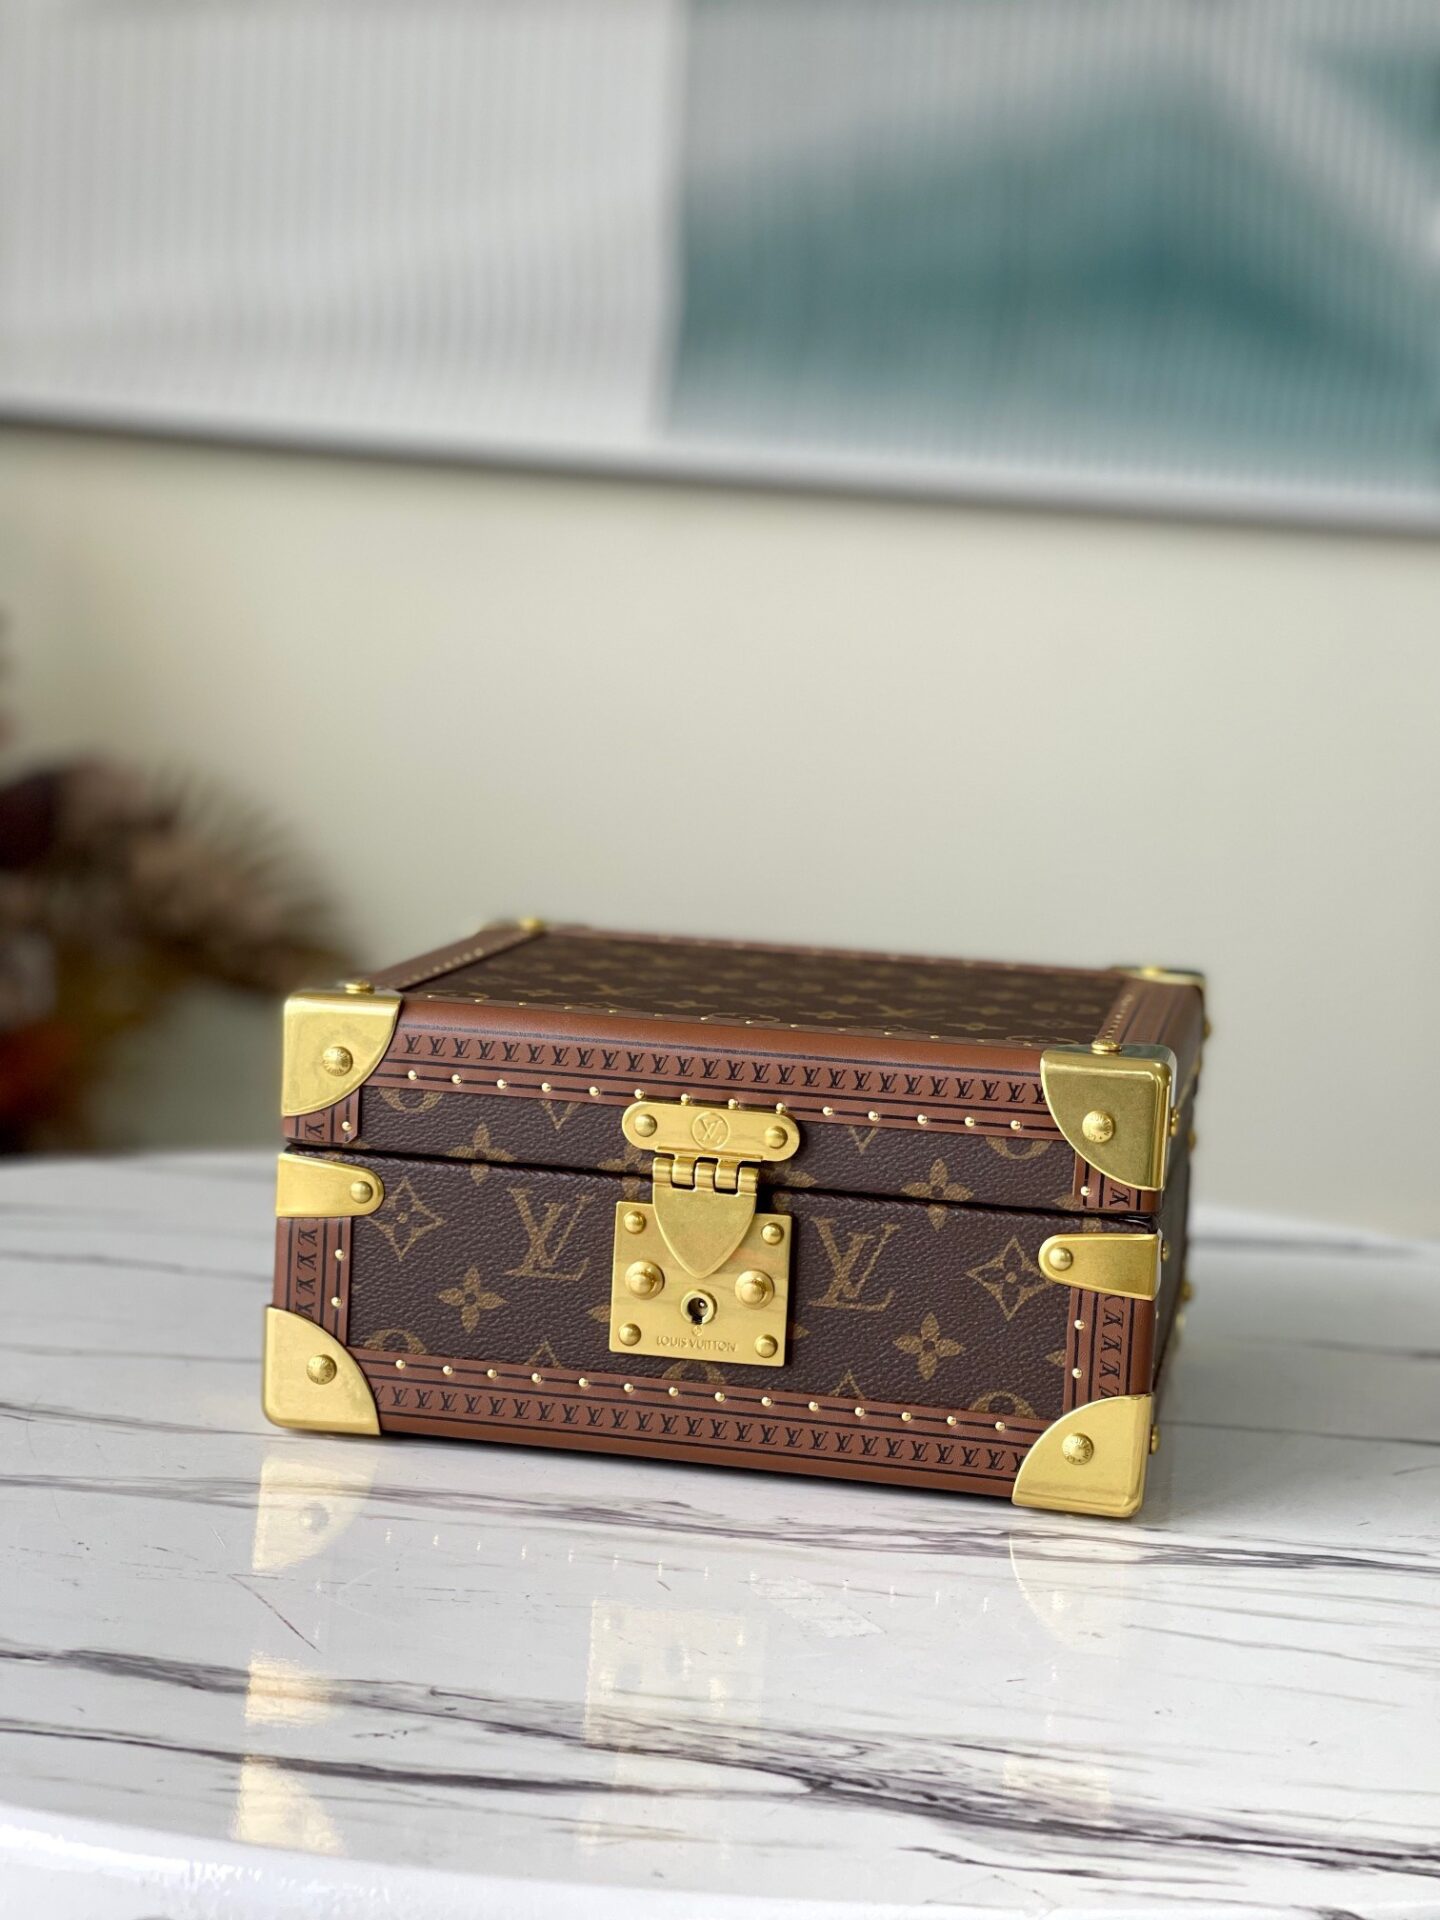 Battered Louis Vuitton storage box bought for 12 sells for 600 times more   Manchester Evening News